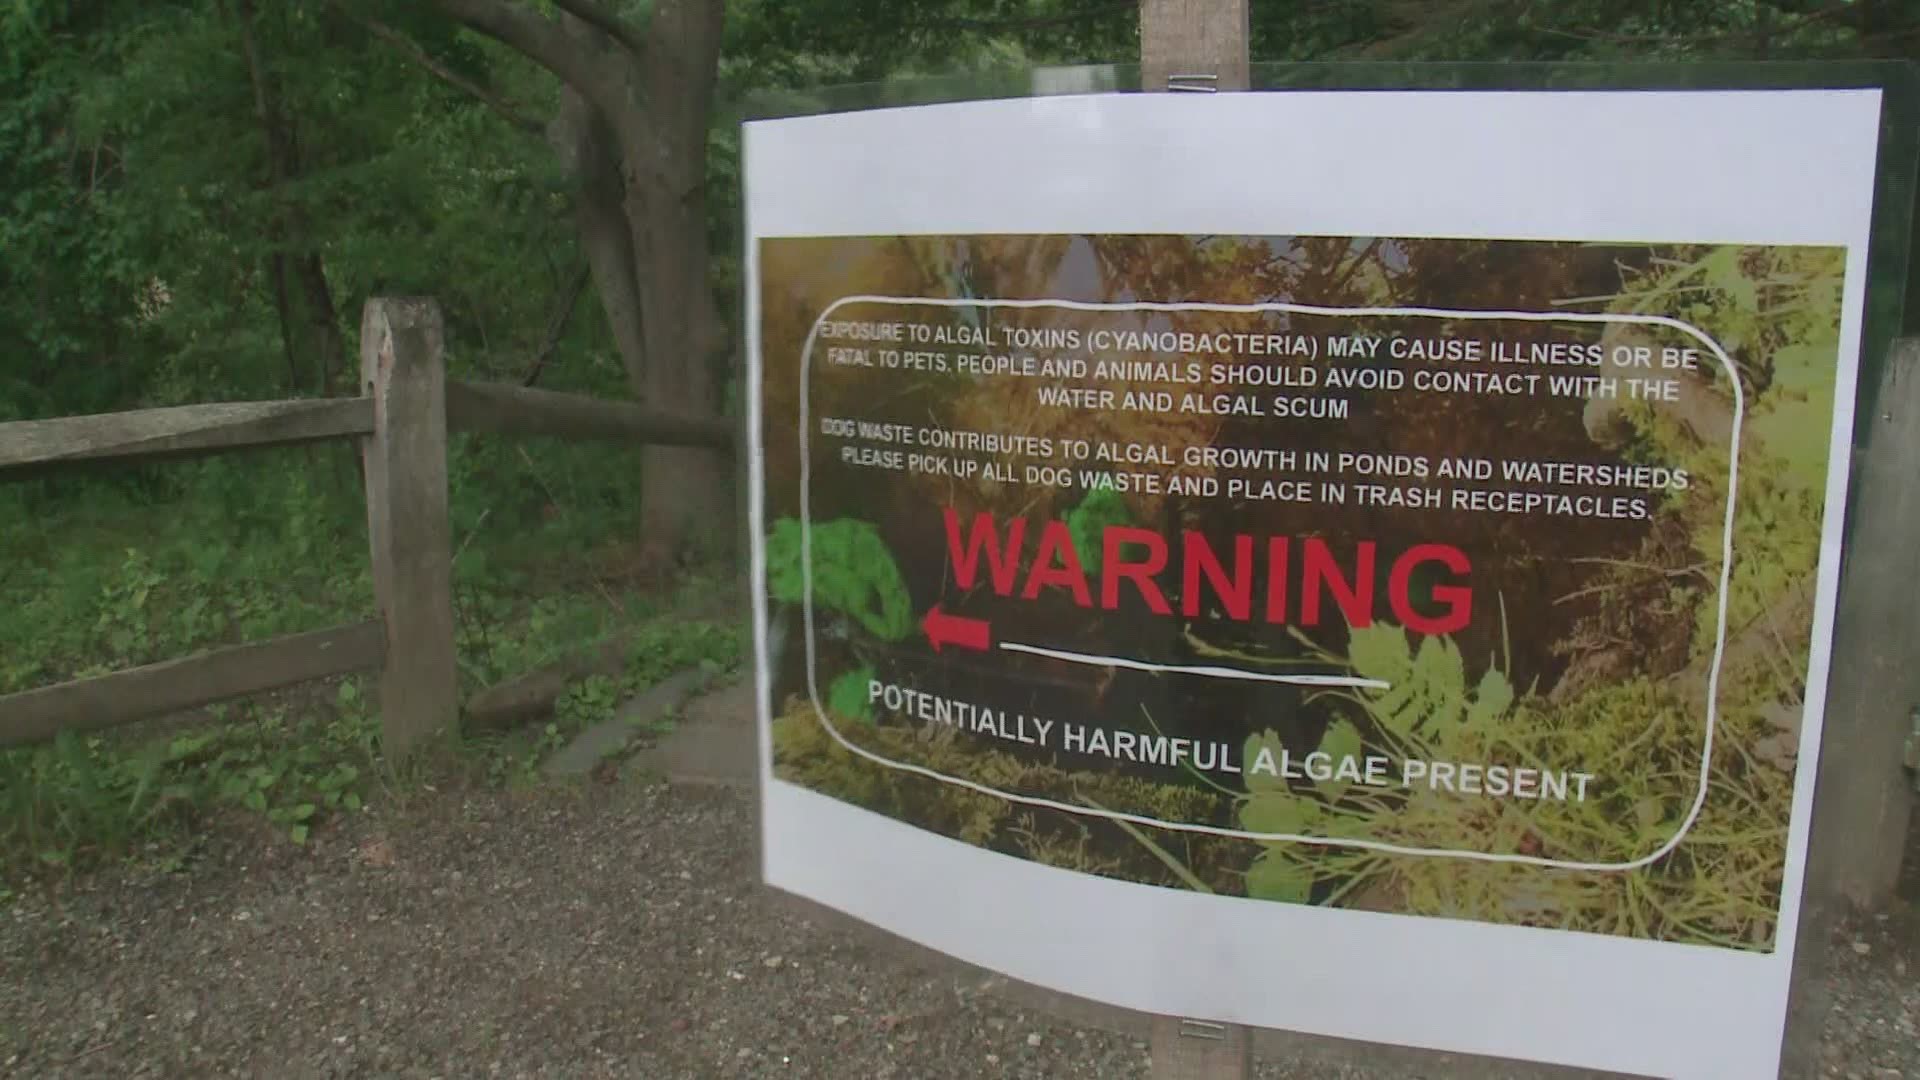 The cyanobacteria bloom found in Hinckley Park can be extremely toxic to dogs